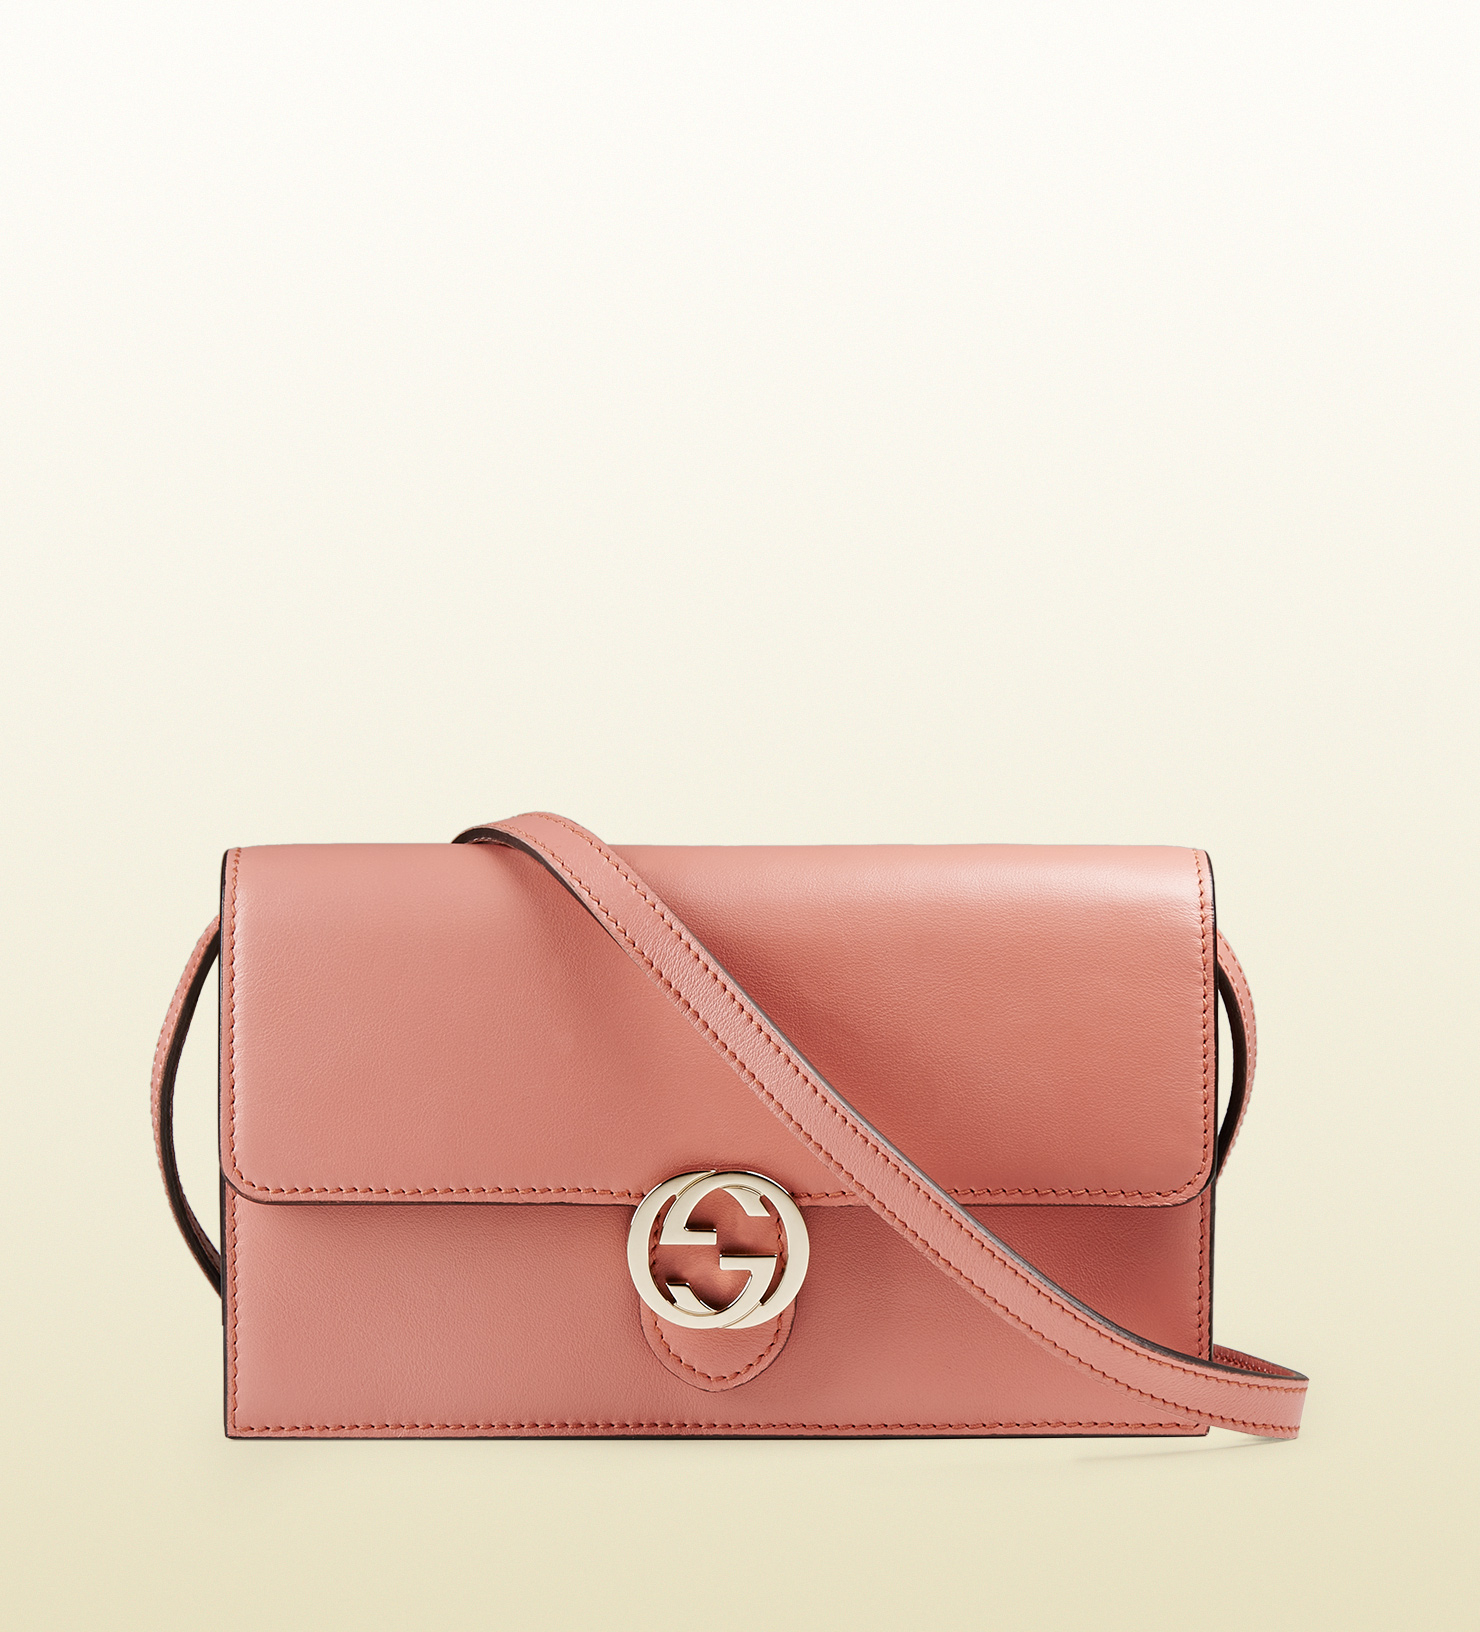 Lyst - Gucci Icon Leather Wallet With Strap in Pink